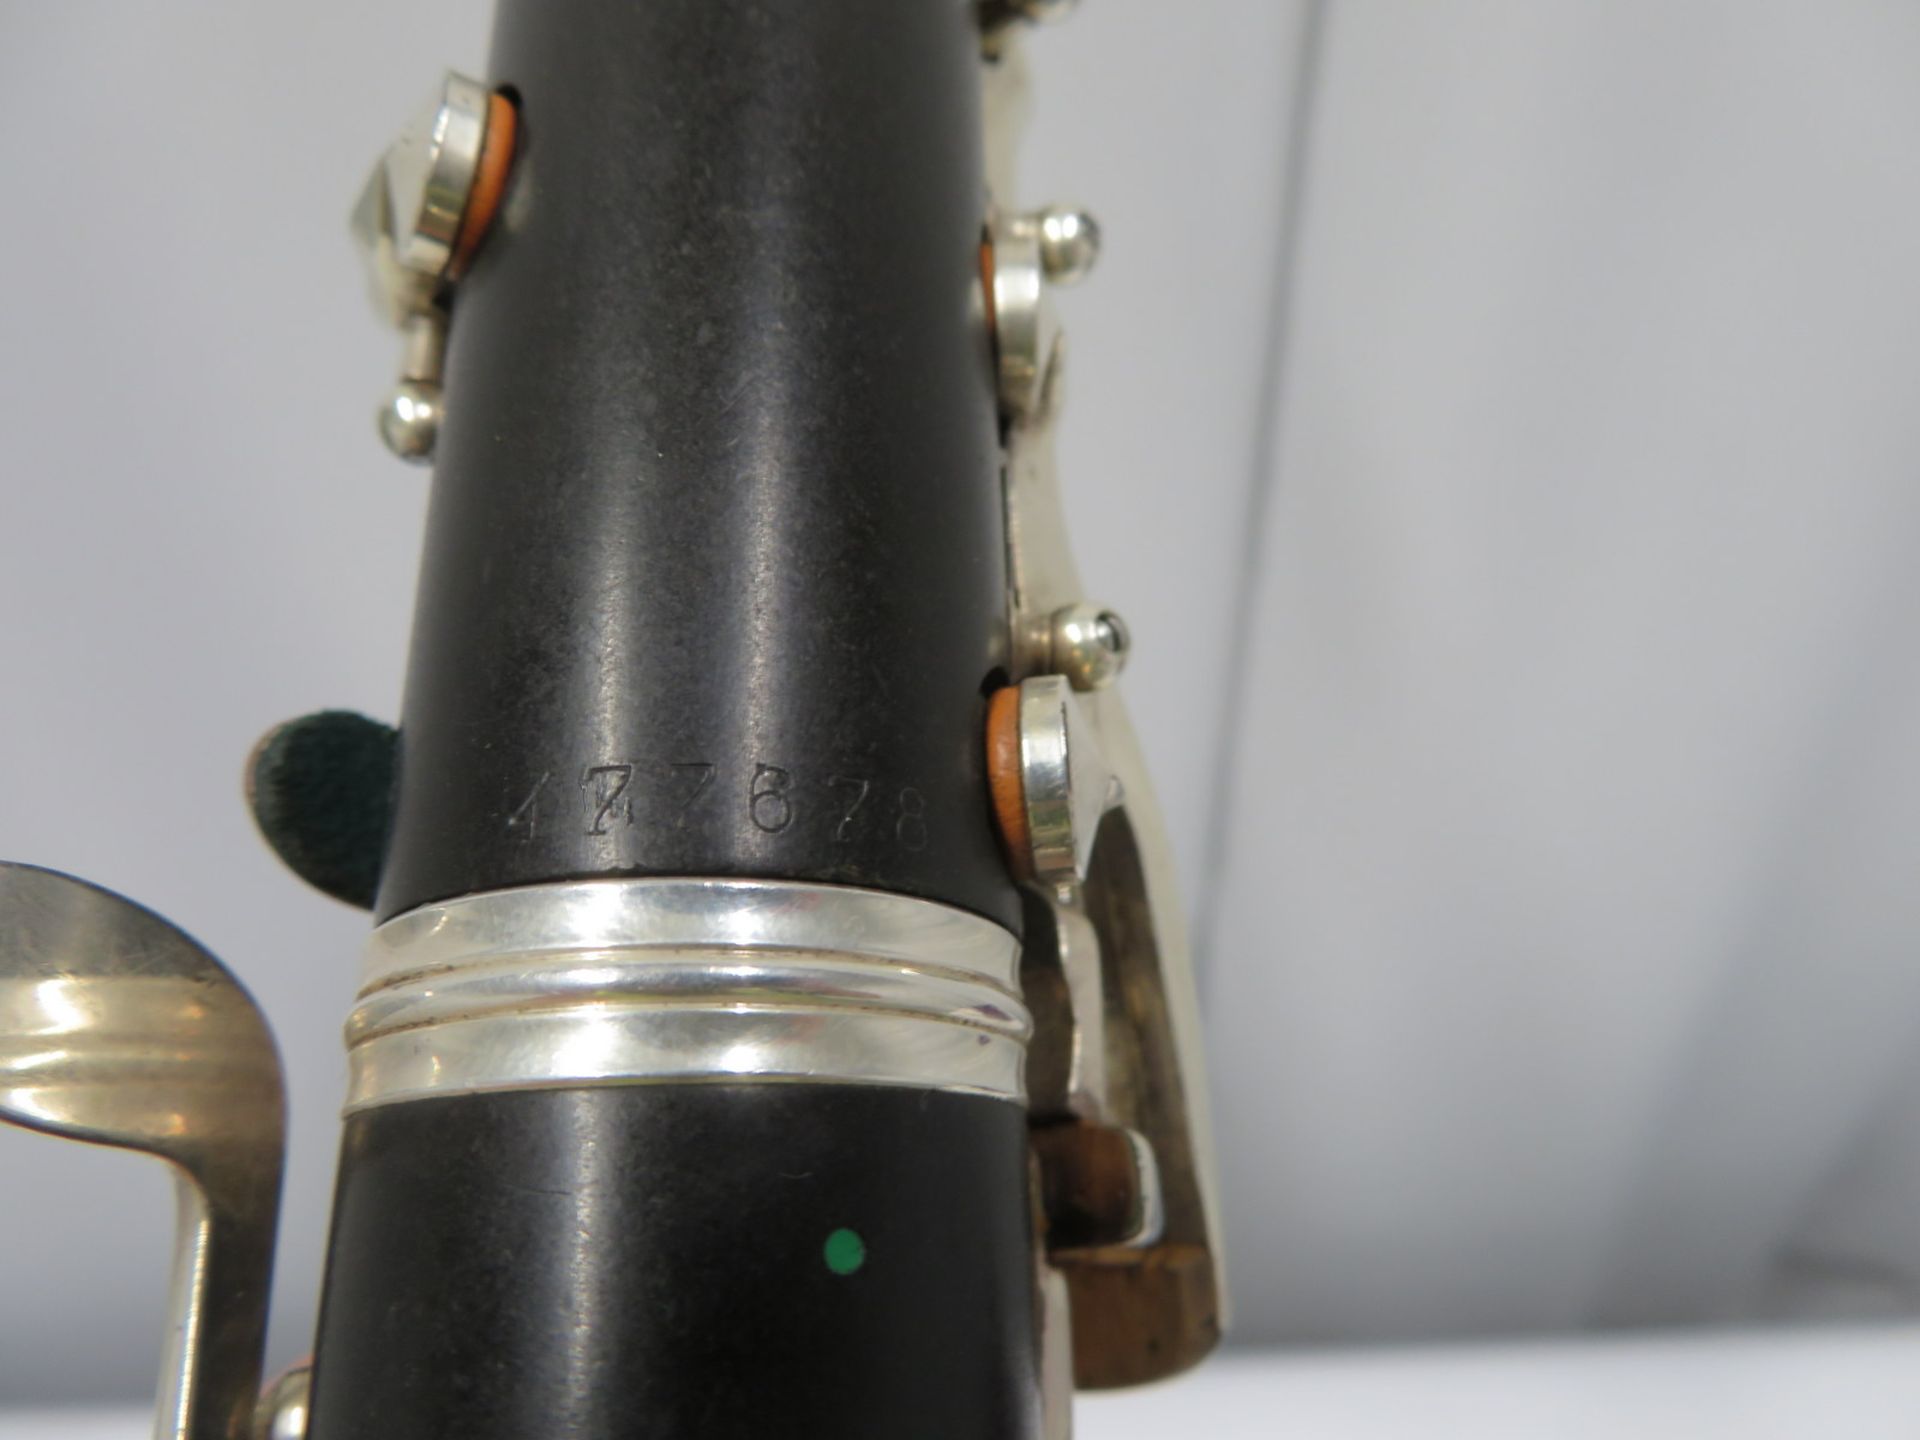 Buffet Crampon L Green clarinet with case. Serial number: 477678. - Image 11 of 19